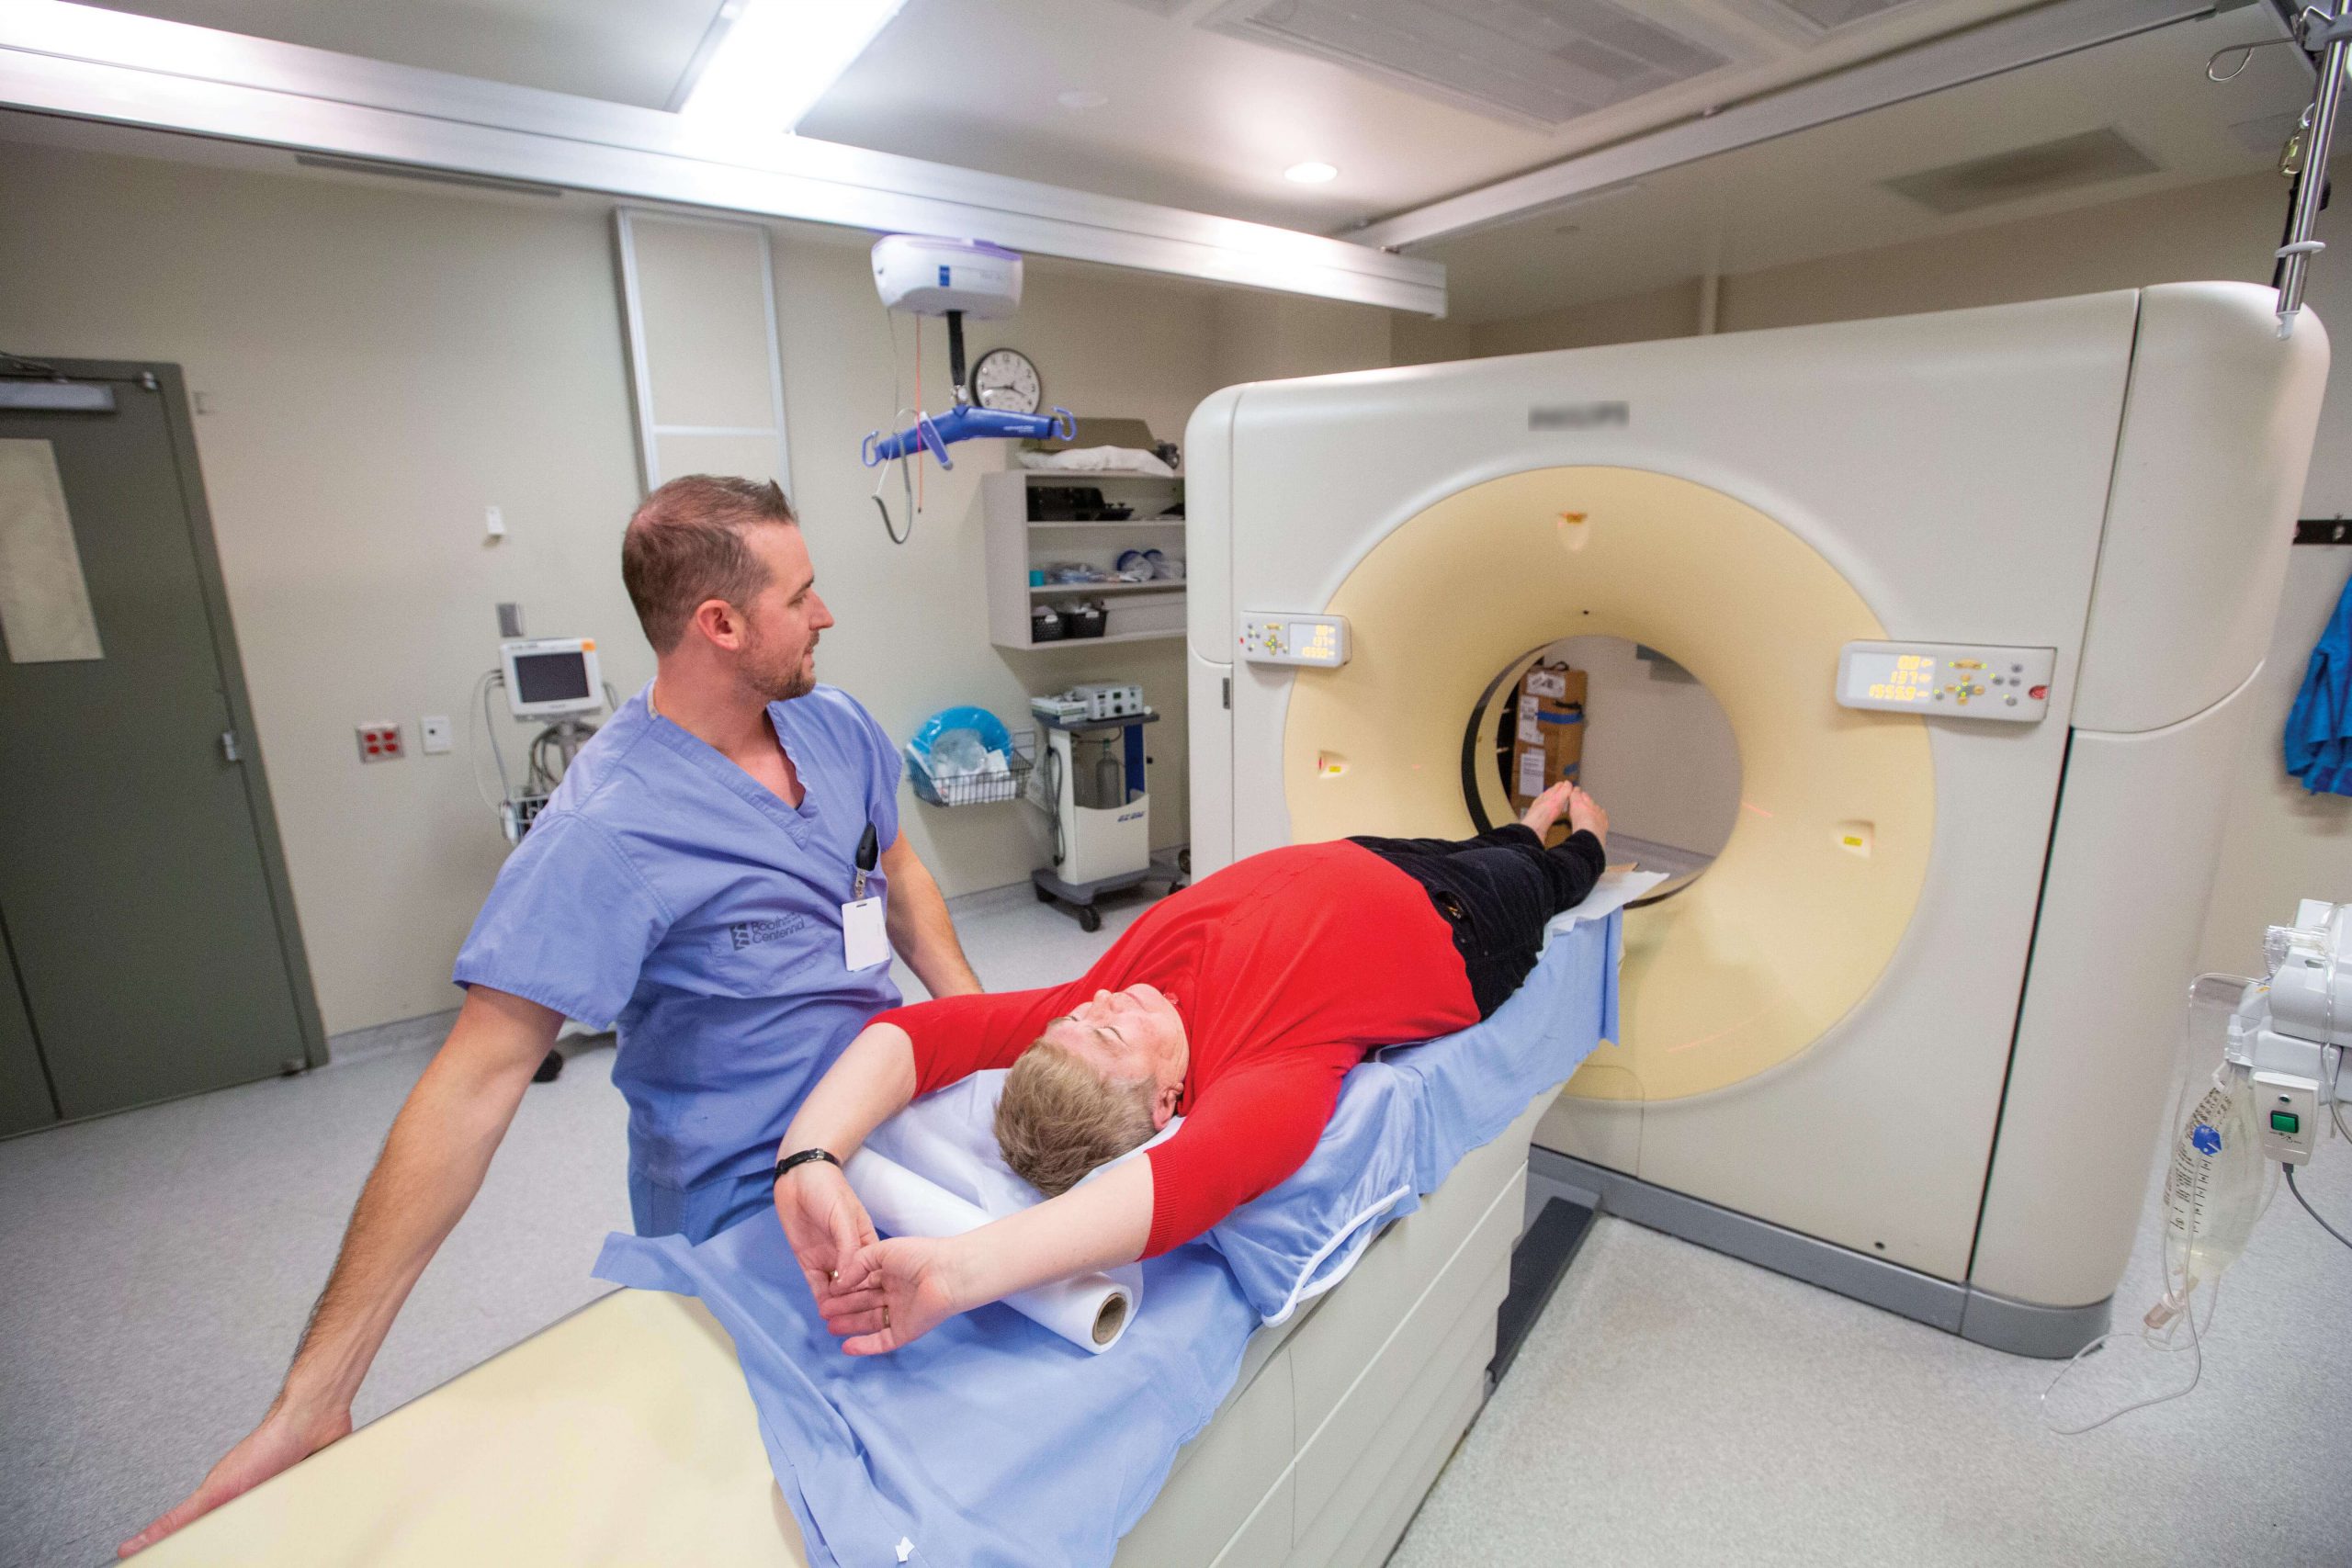 A Medical Radiation Technologist and volunteer demonstrate a CT scanner